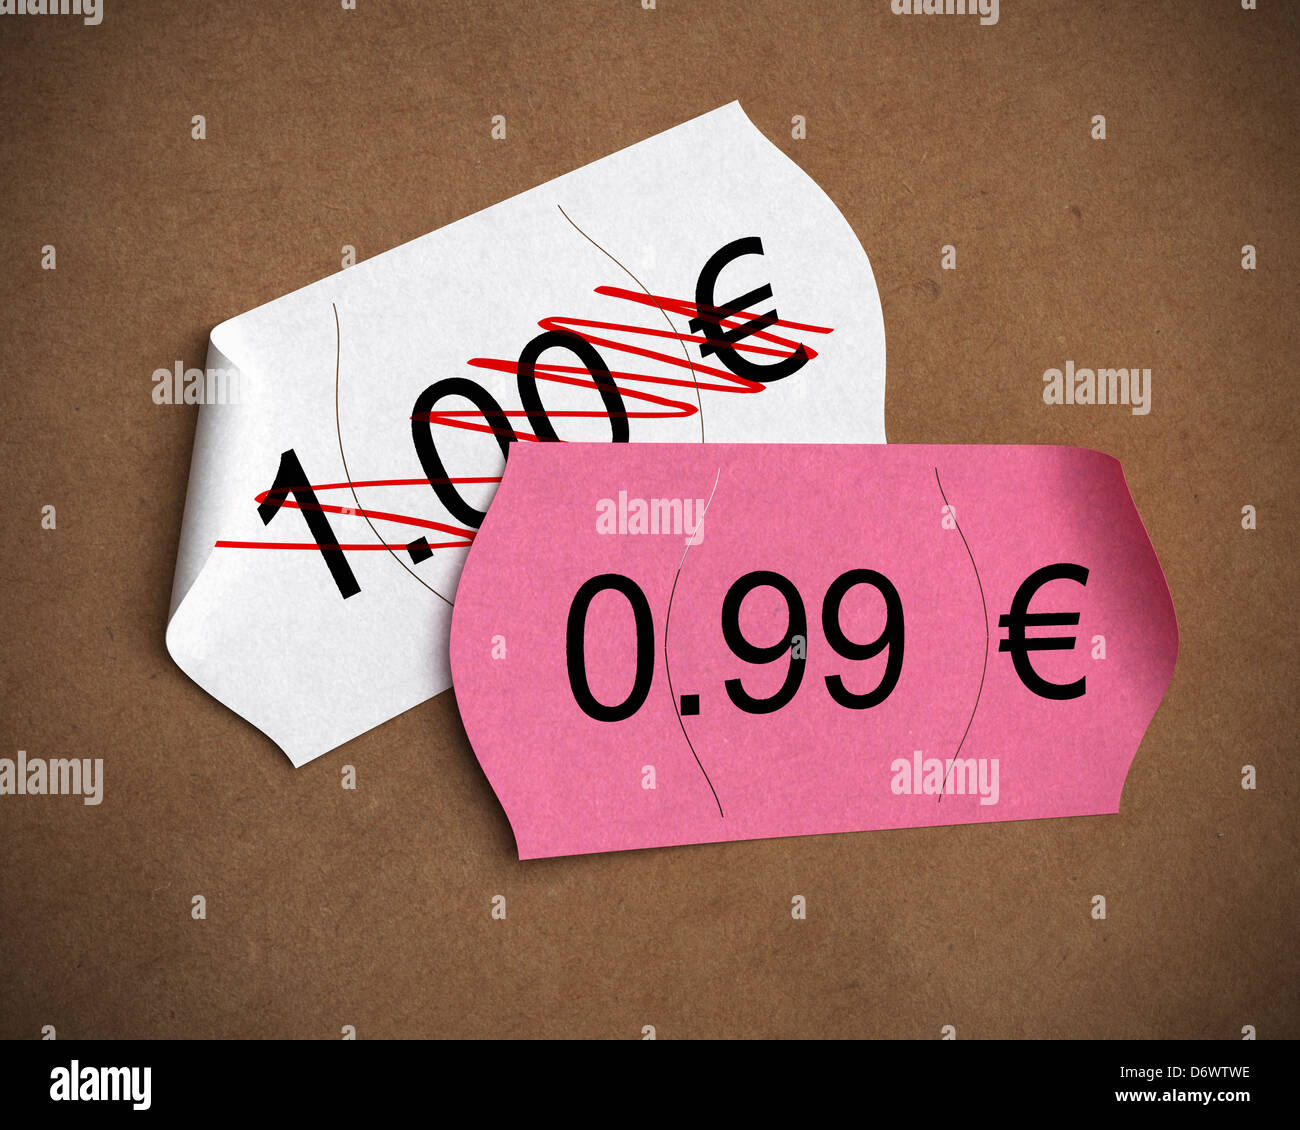 0.99 € psychological price written on a pink label upon another one where it's written 1.00 euro, brown kraft paper background Stock Photo